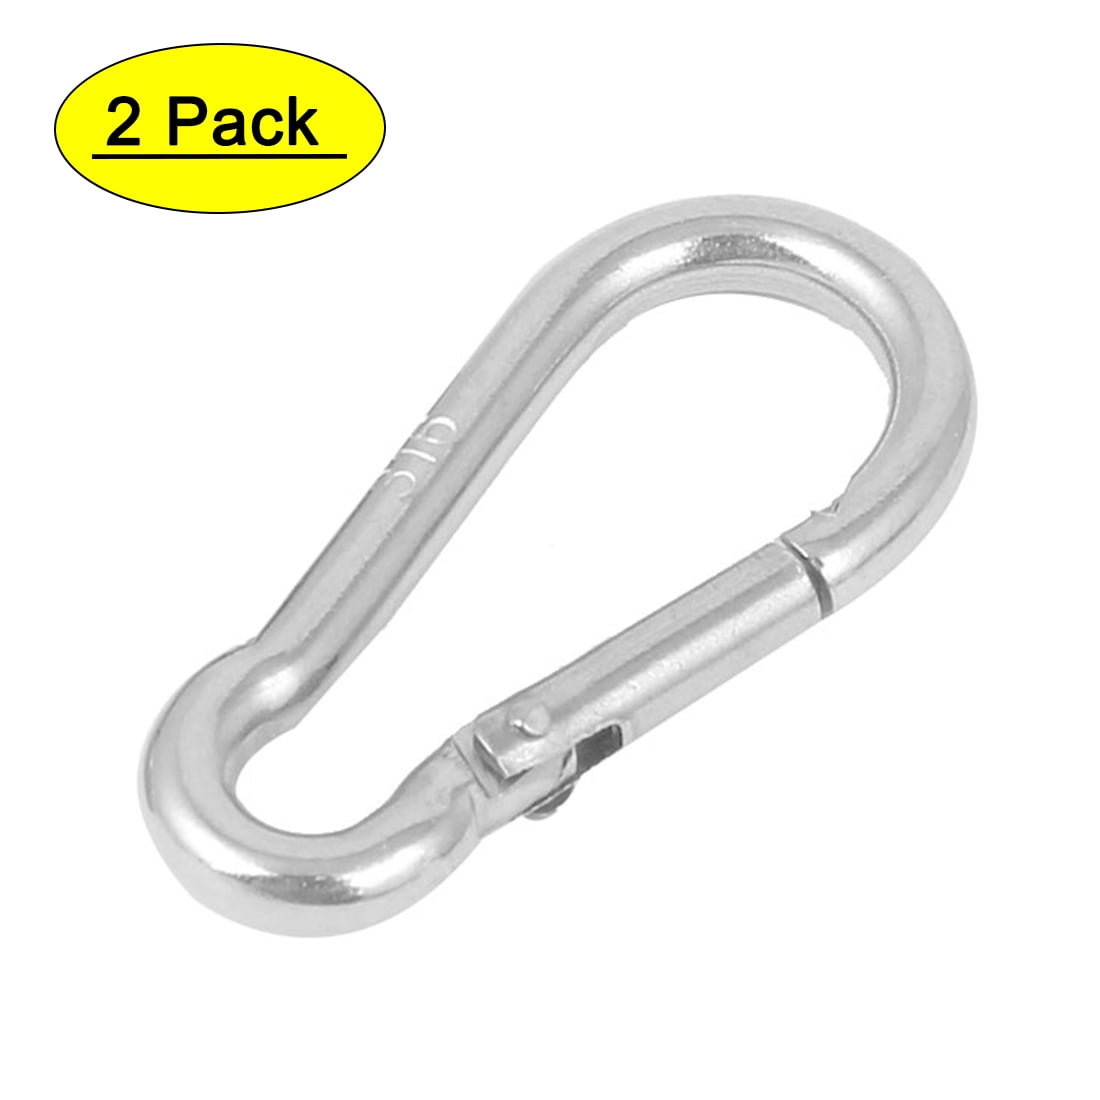 AISI316 Stainless Steel Spring Locking Carabiner Snap Hook size 3/16" to 1/2" 